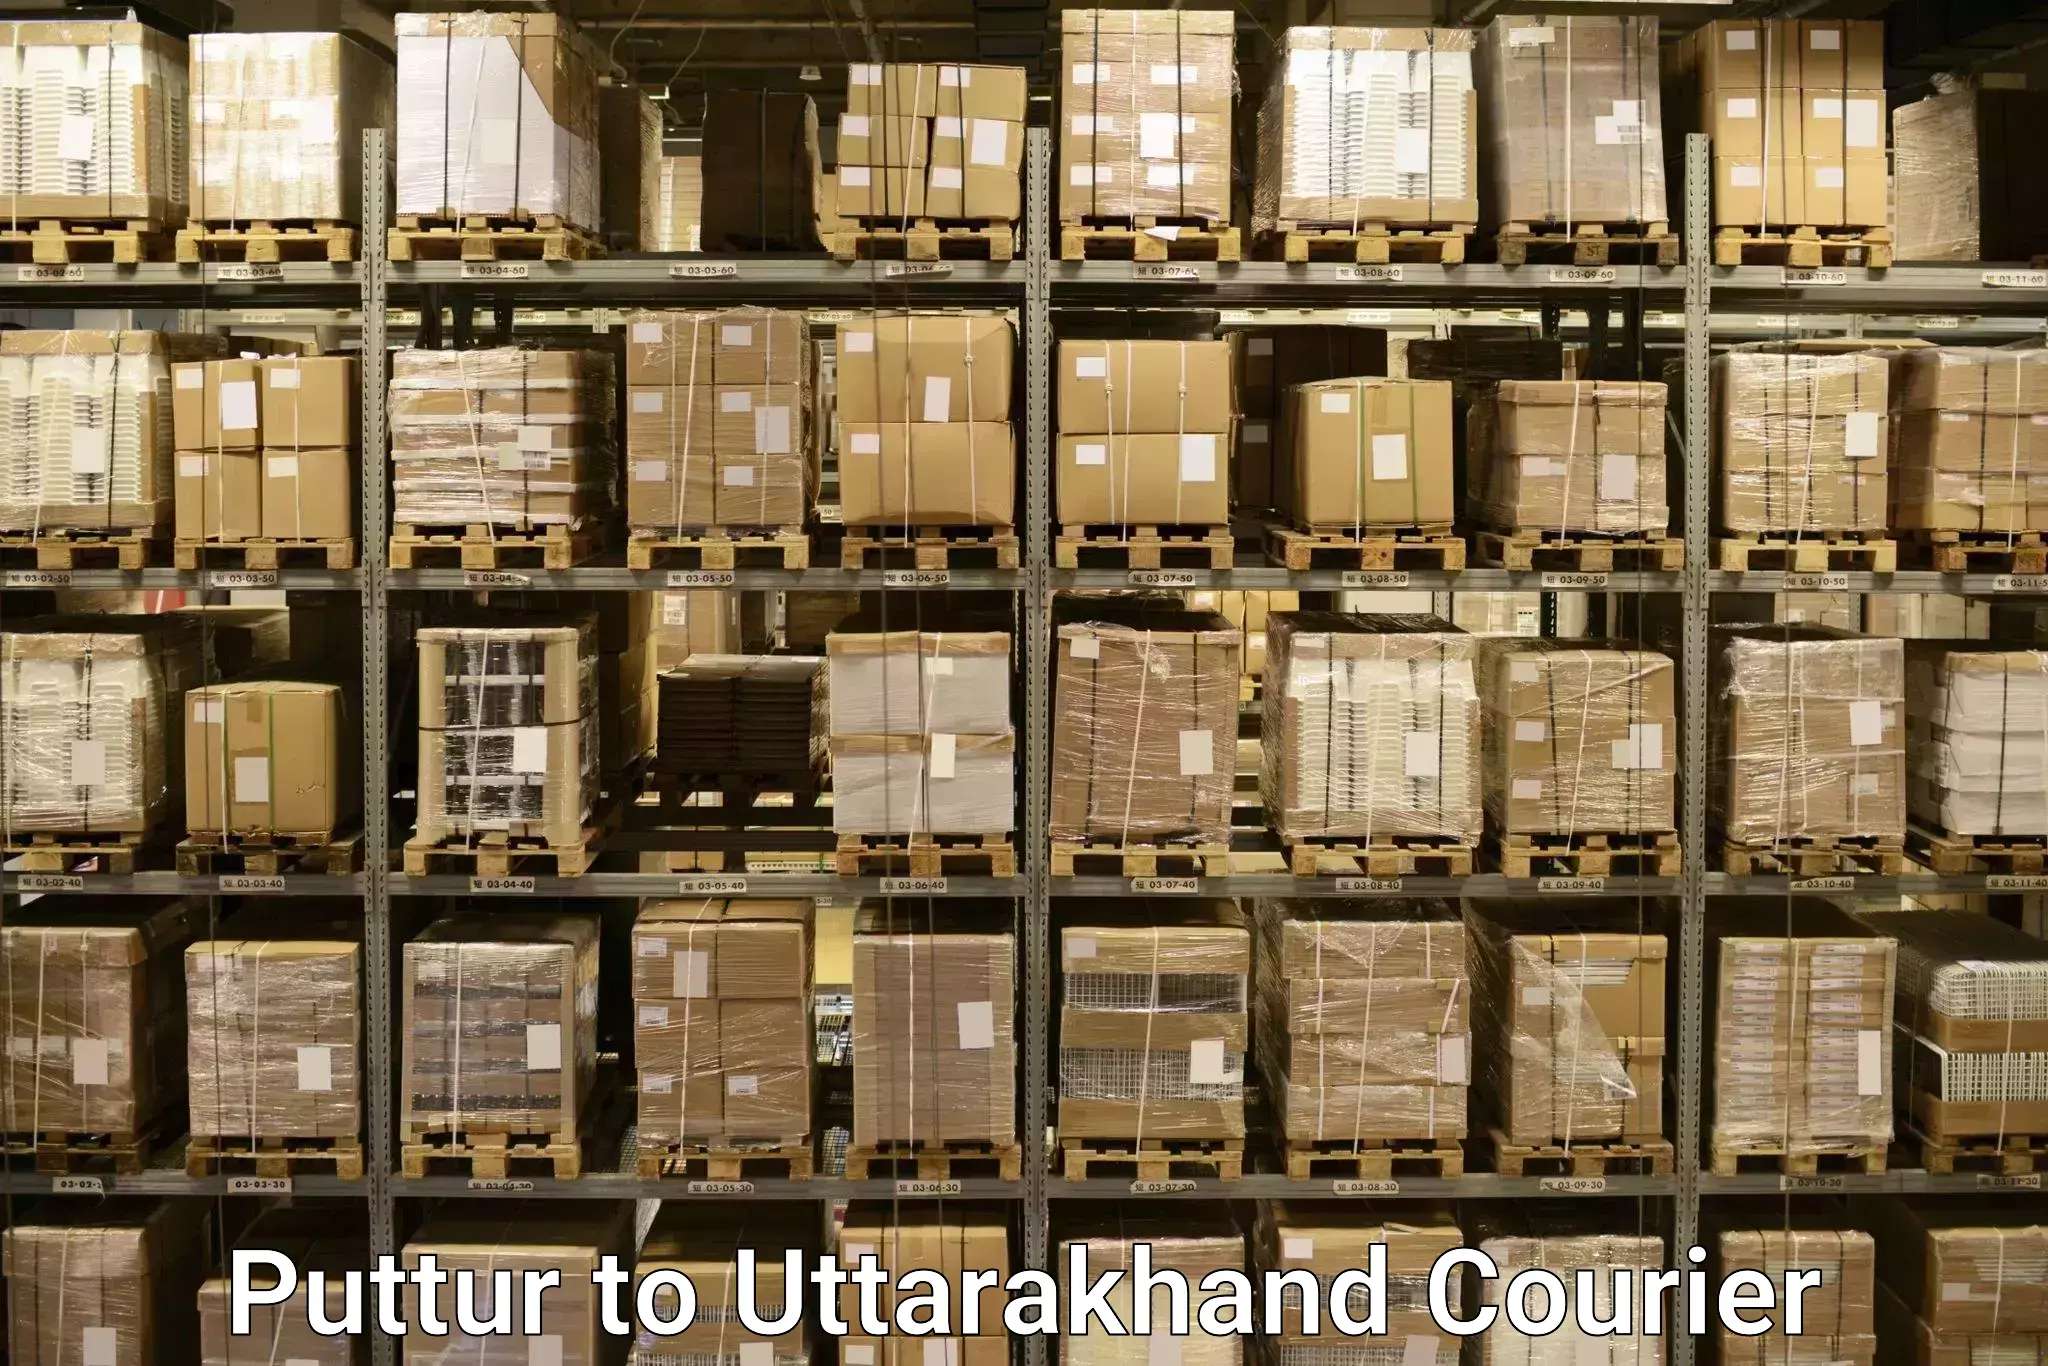 Baggage delivery technology Puttur to Rudrapur